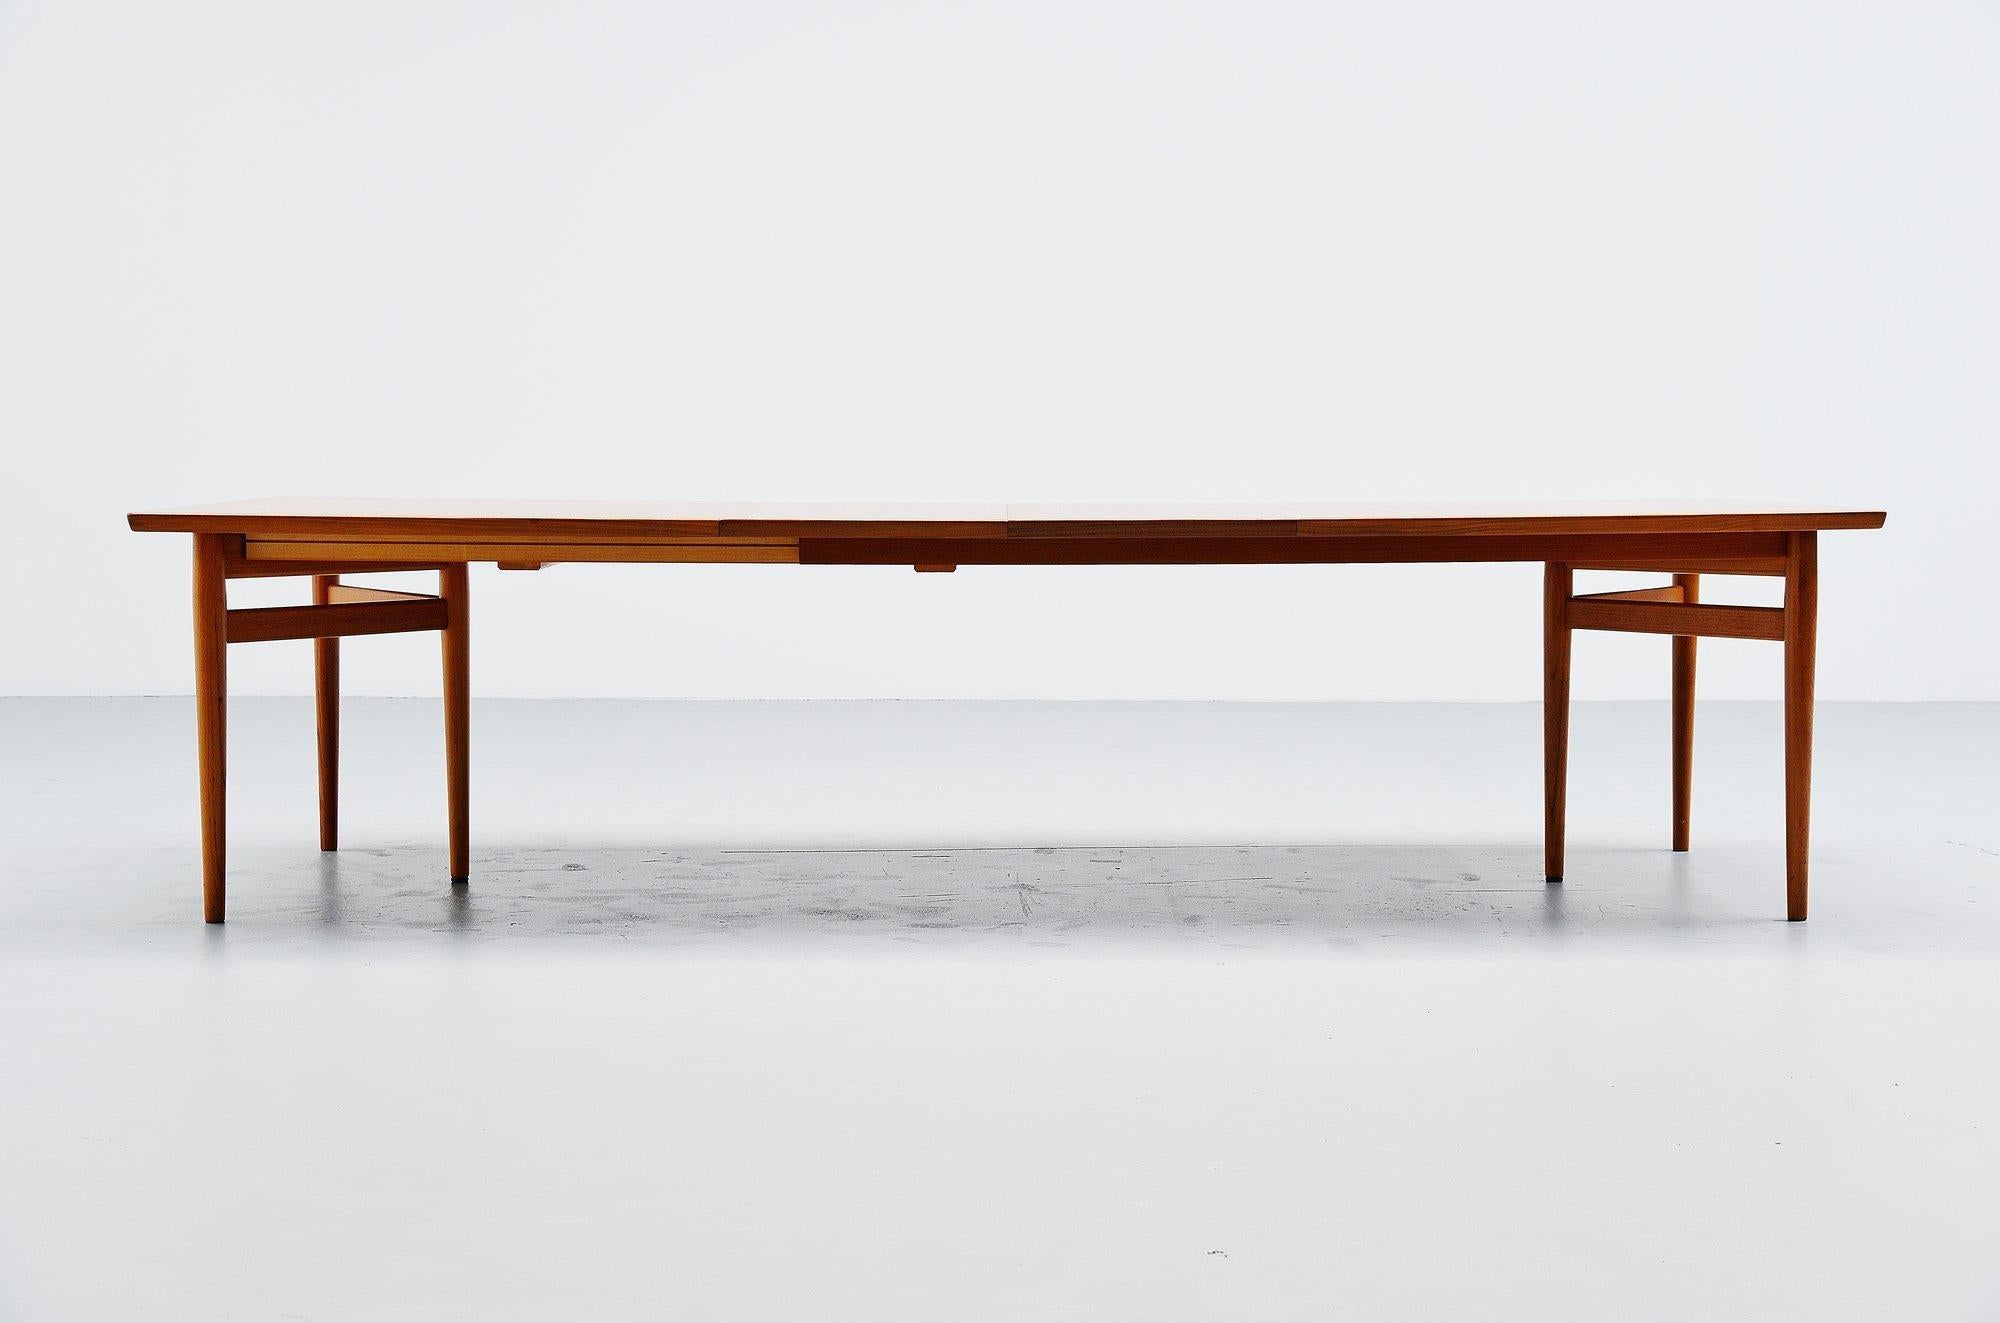 Arne Vodder dining table model 201 designed by Arne Vodder and manufactured by Sibast Mobler, Denmark 1960. The table is made in teak wood, is fully restored and looks great again. The table has 2 extension leafs in the middle which can extract the